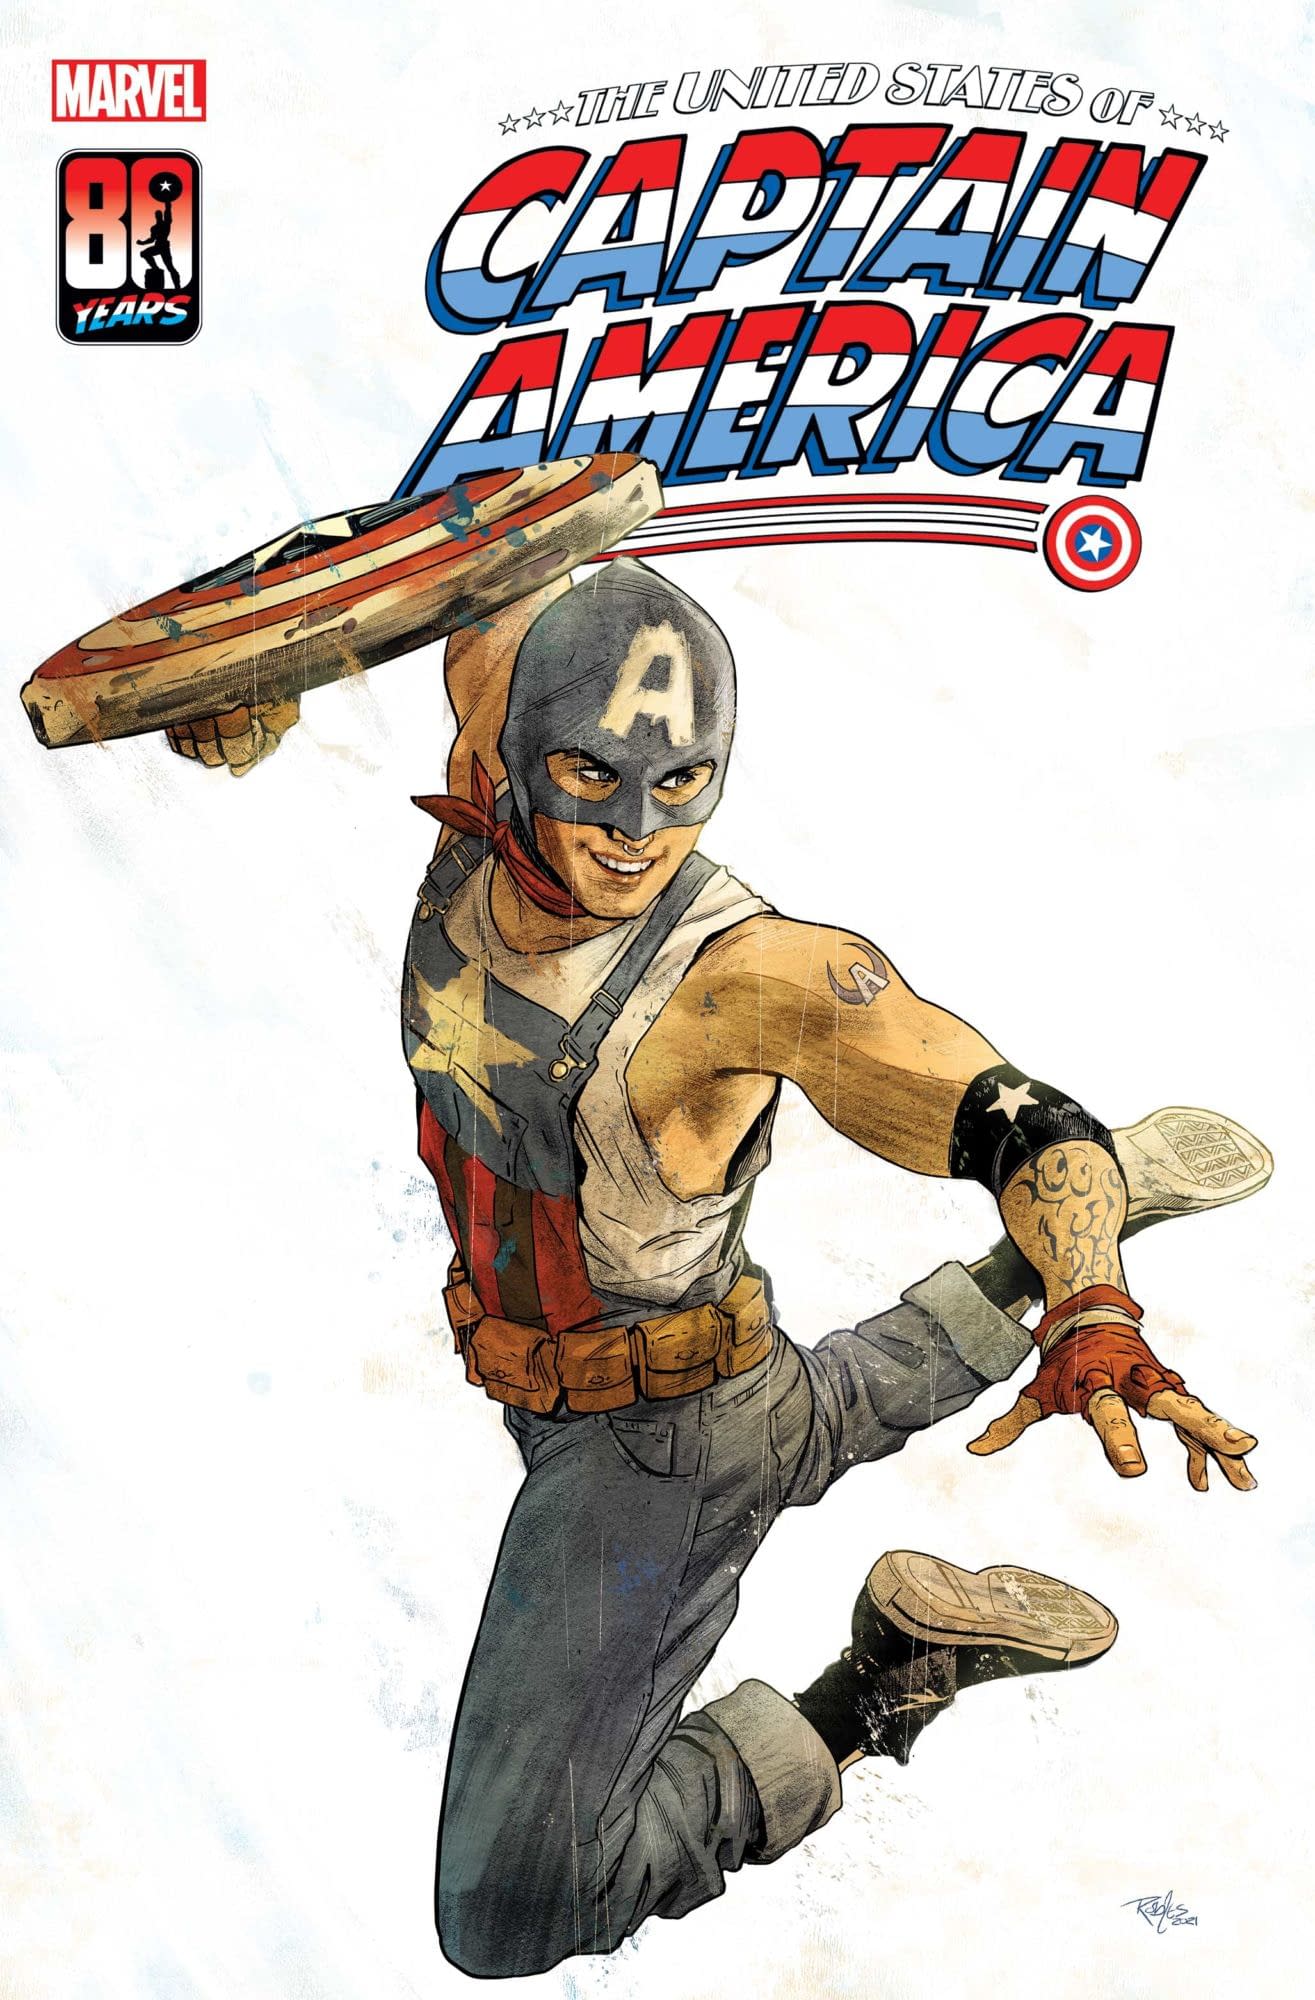 A promotional image showing off the comiccover of Aaron Fischer, the new gay Captain America. He wears a simplified Captain America outfit and carries the shield as he jumps in the air.